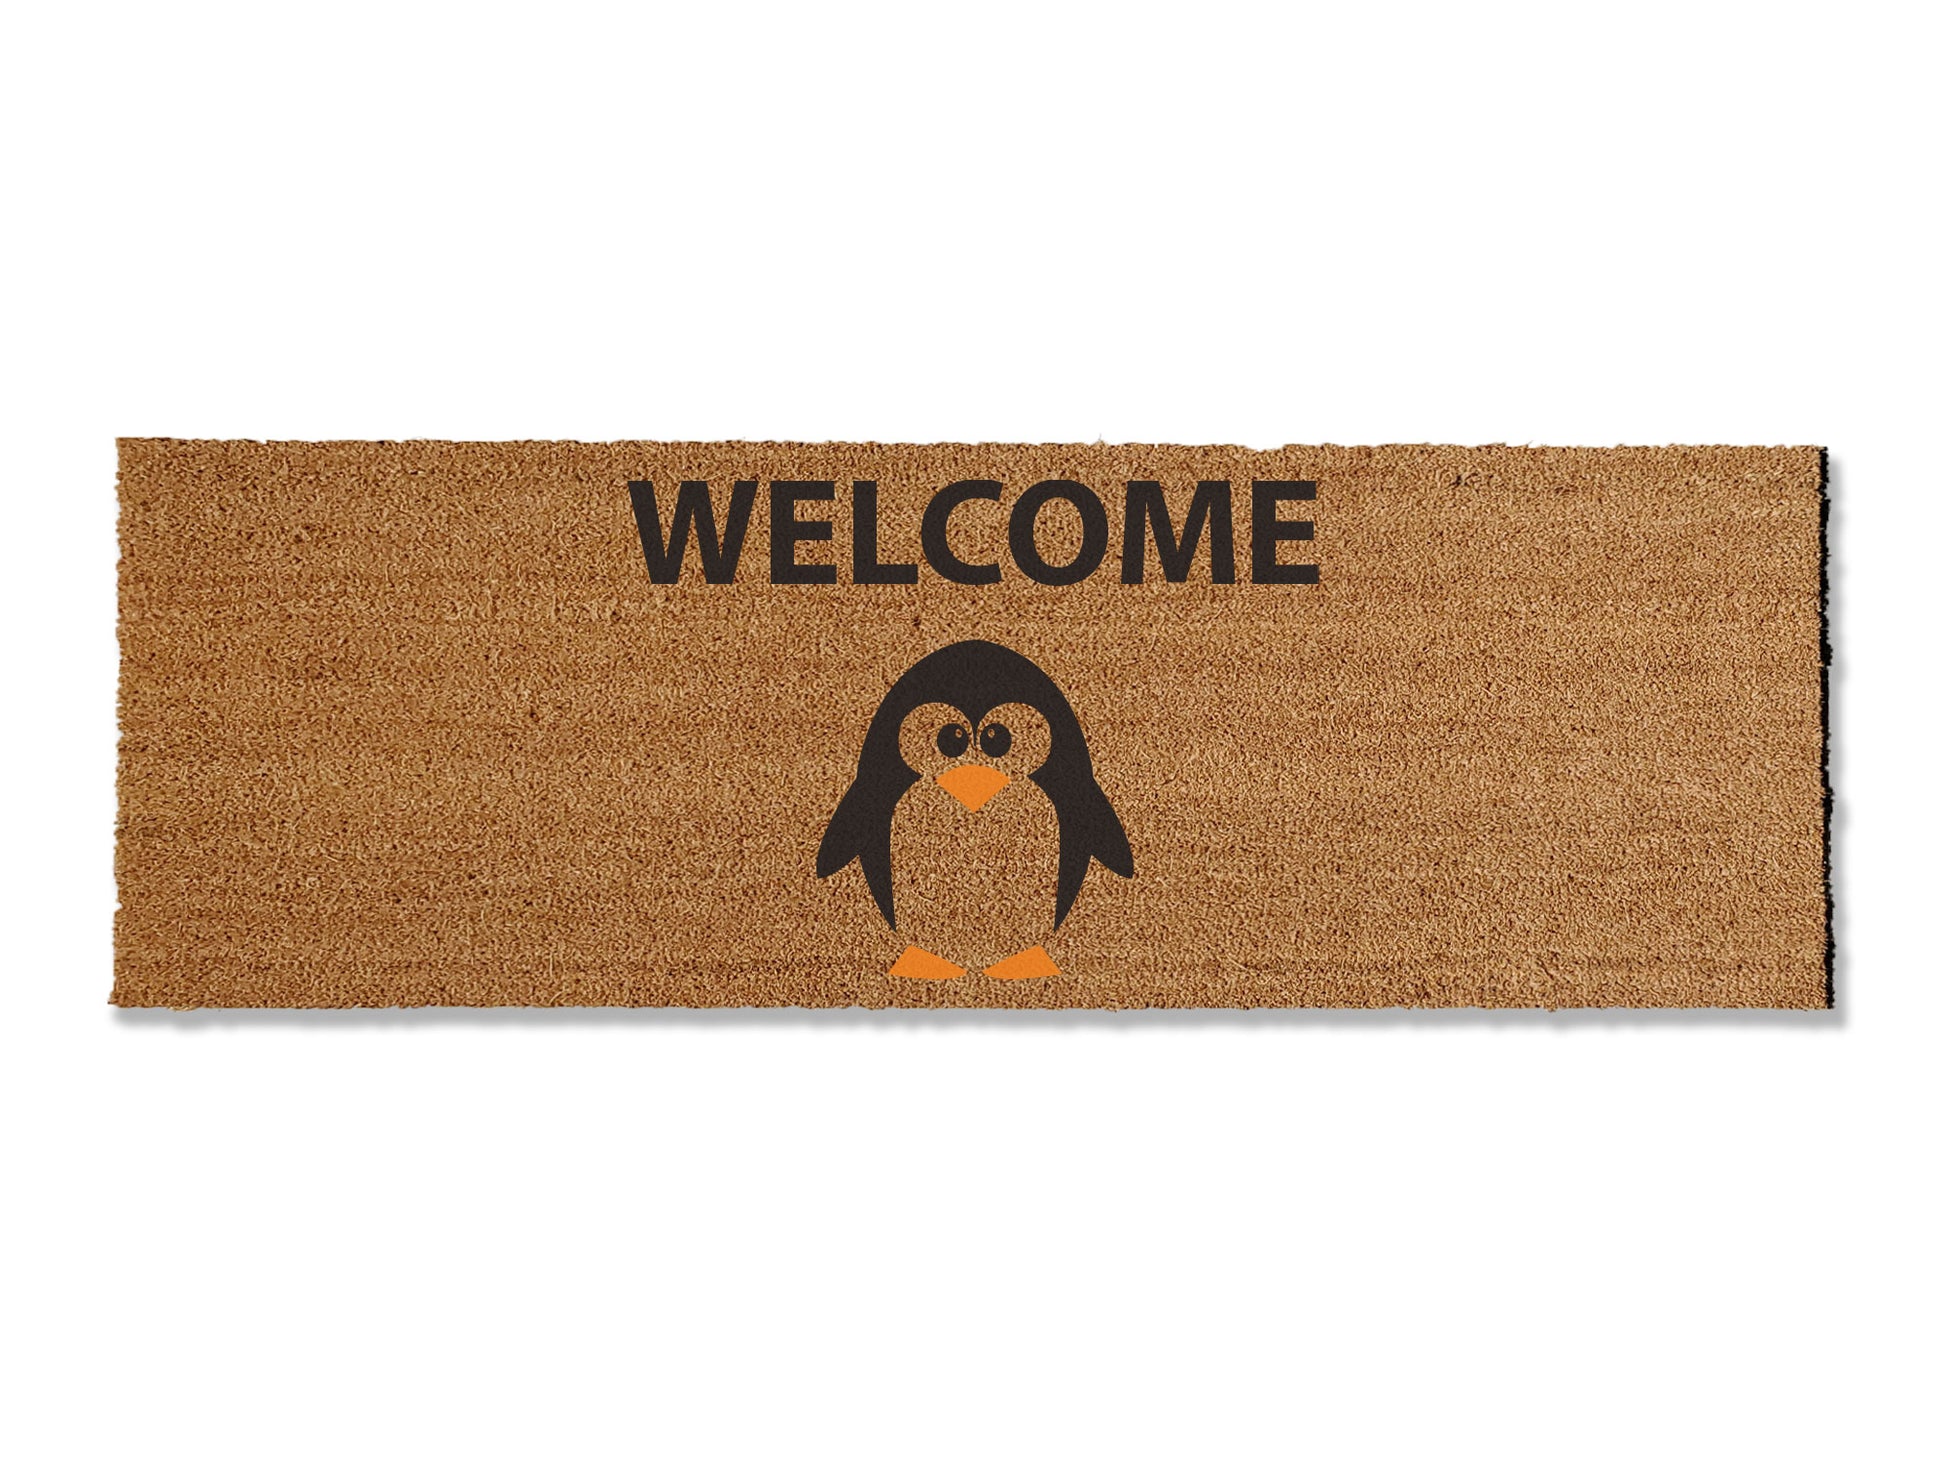 Welcome guests year-round with our coir doormat featuring an adorable penguin design. The perfect addition to your entryway, this charming mat is available in multiple sizes and excels at trapping dirt. Invite a touch of whimsy and functionality to your doorstep with this delightful coir doormat.